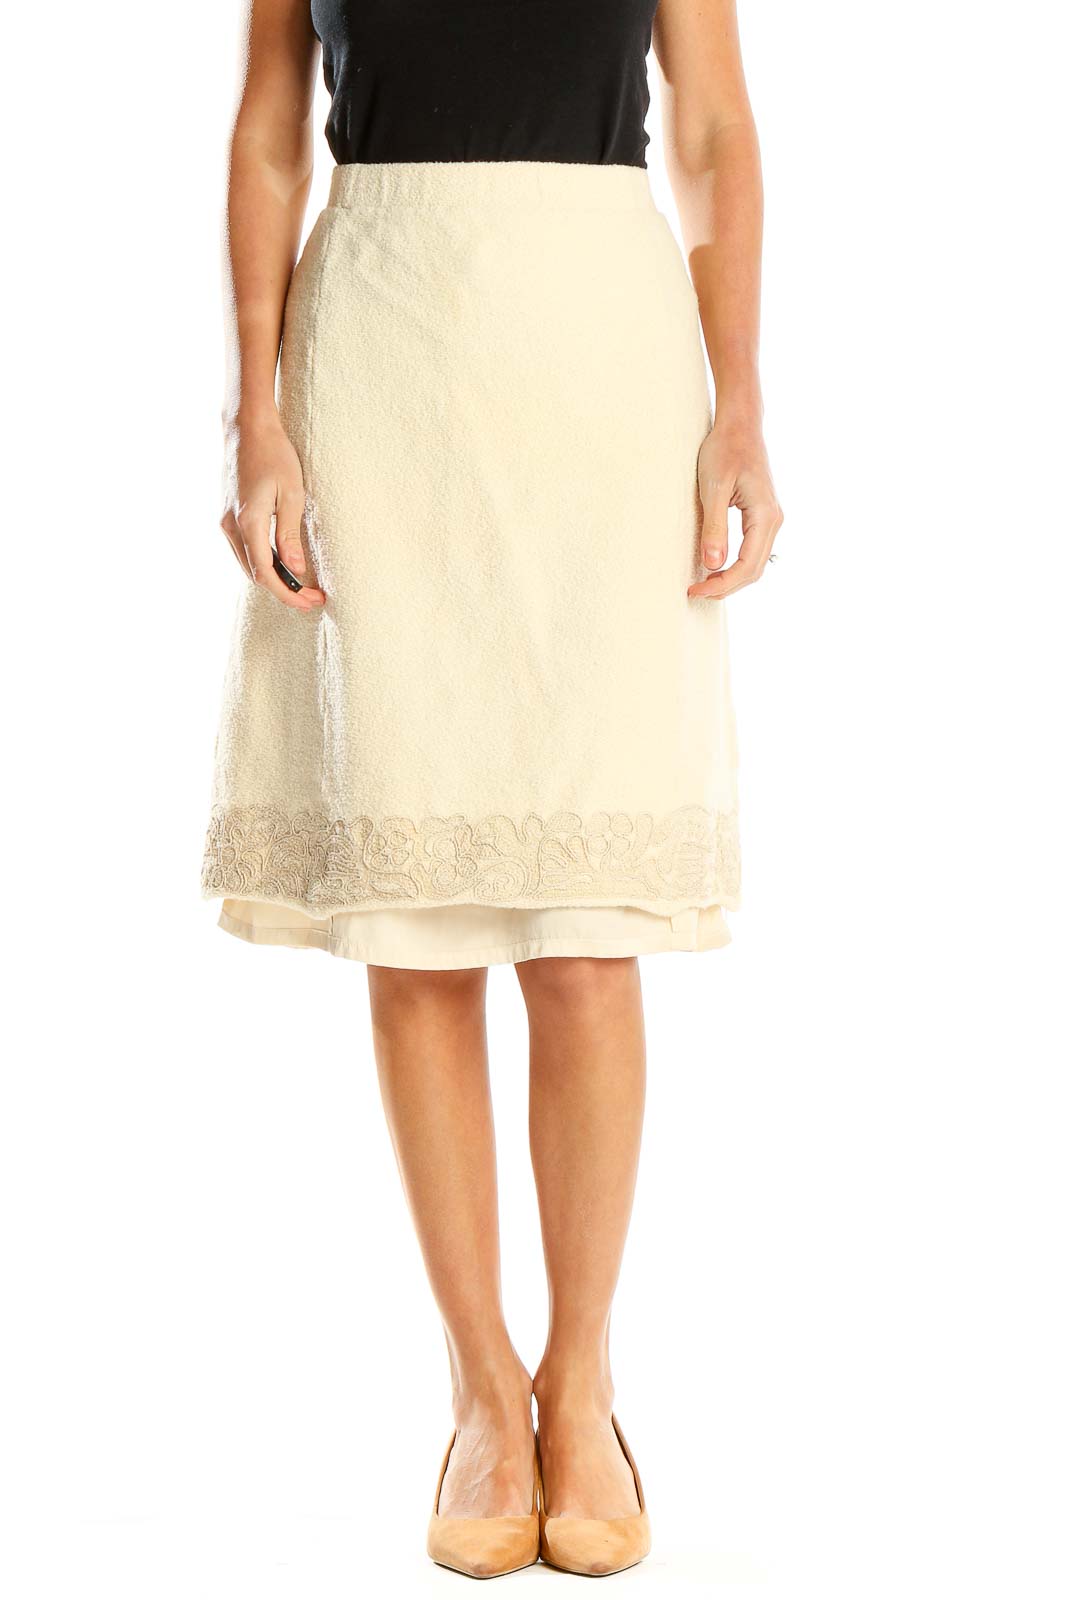 Beige Chic Vintage Embroidered A-Line Skirt Front